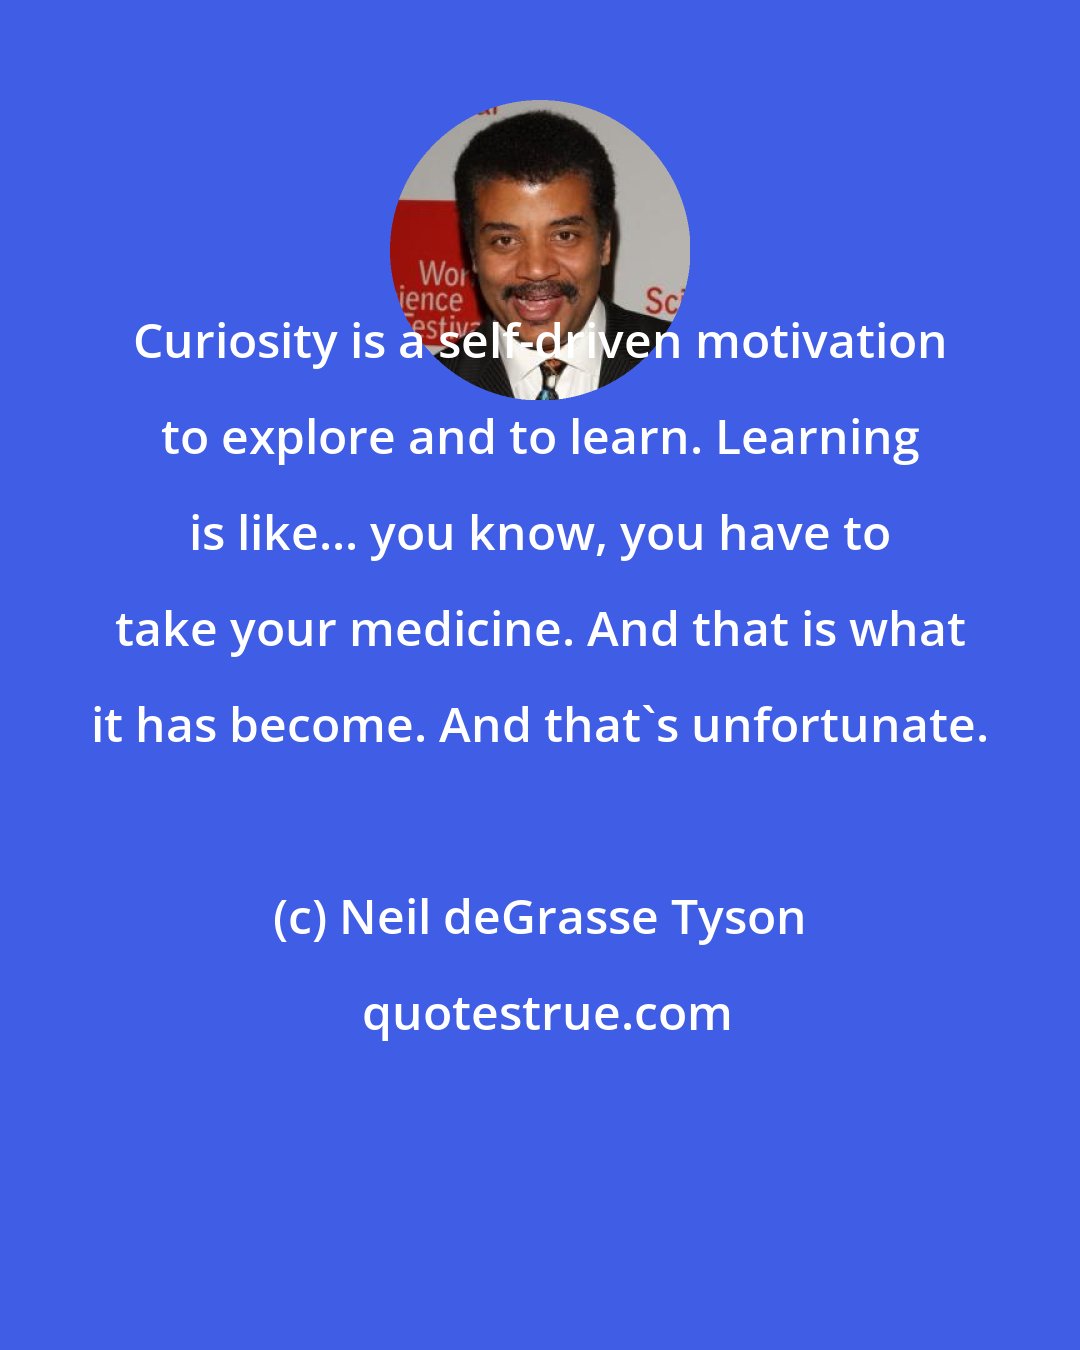 Neil deGrasse Tyson: Curiosity is a self-driven motivation to explore and to learn. Learning is like... you know, you have to take your medicine. And that is what it has become. And that's unfortunate.